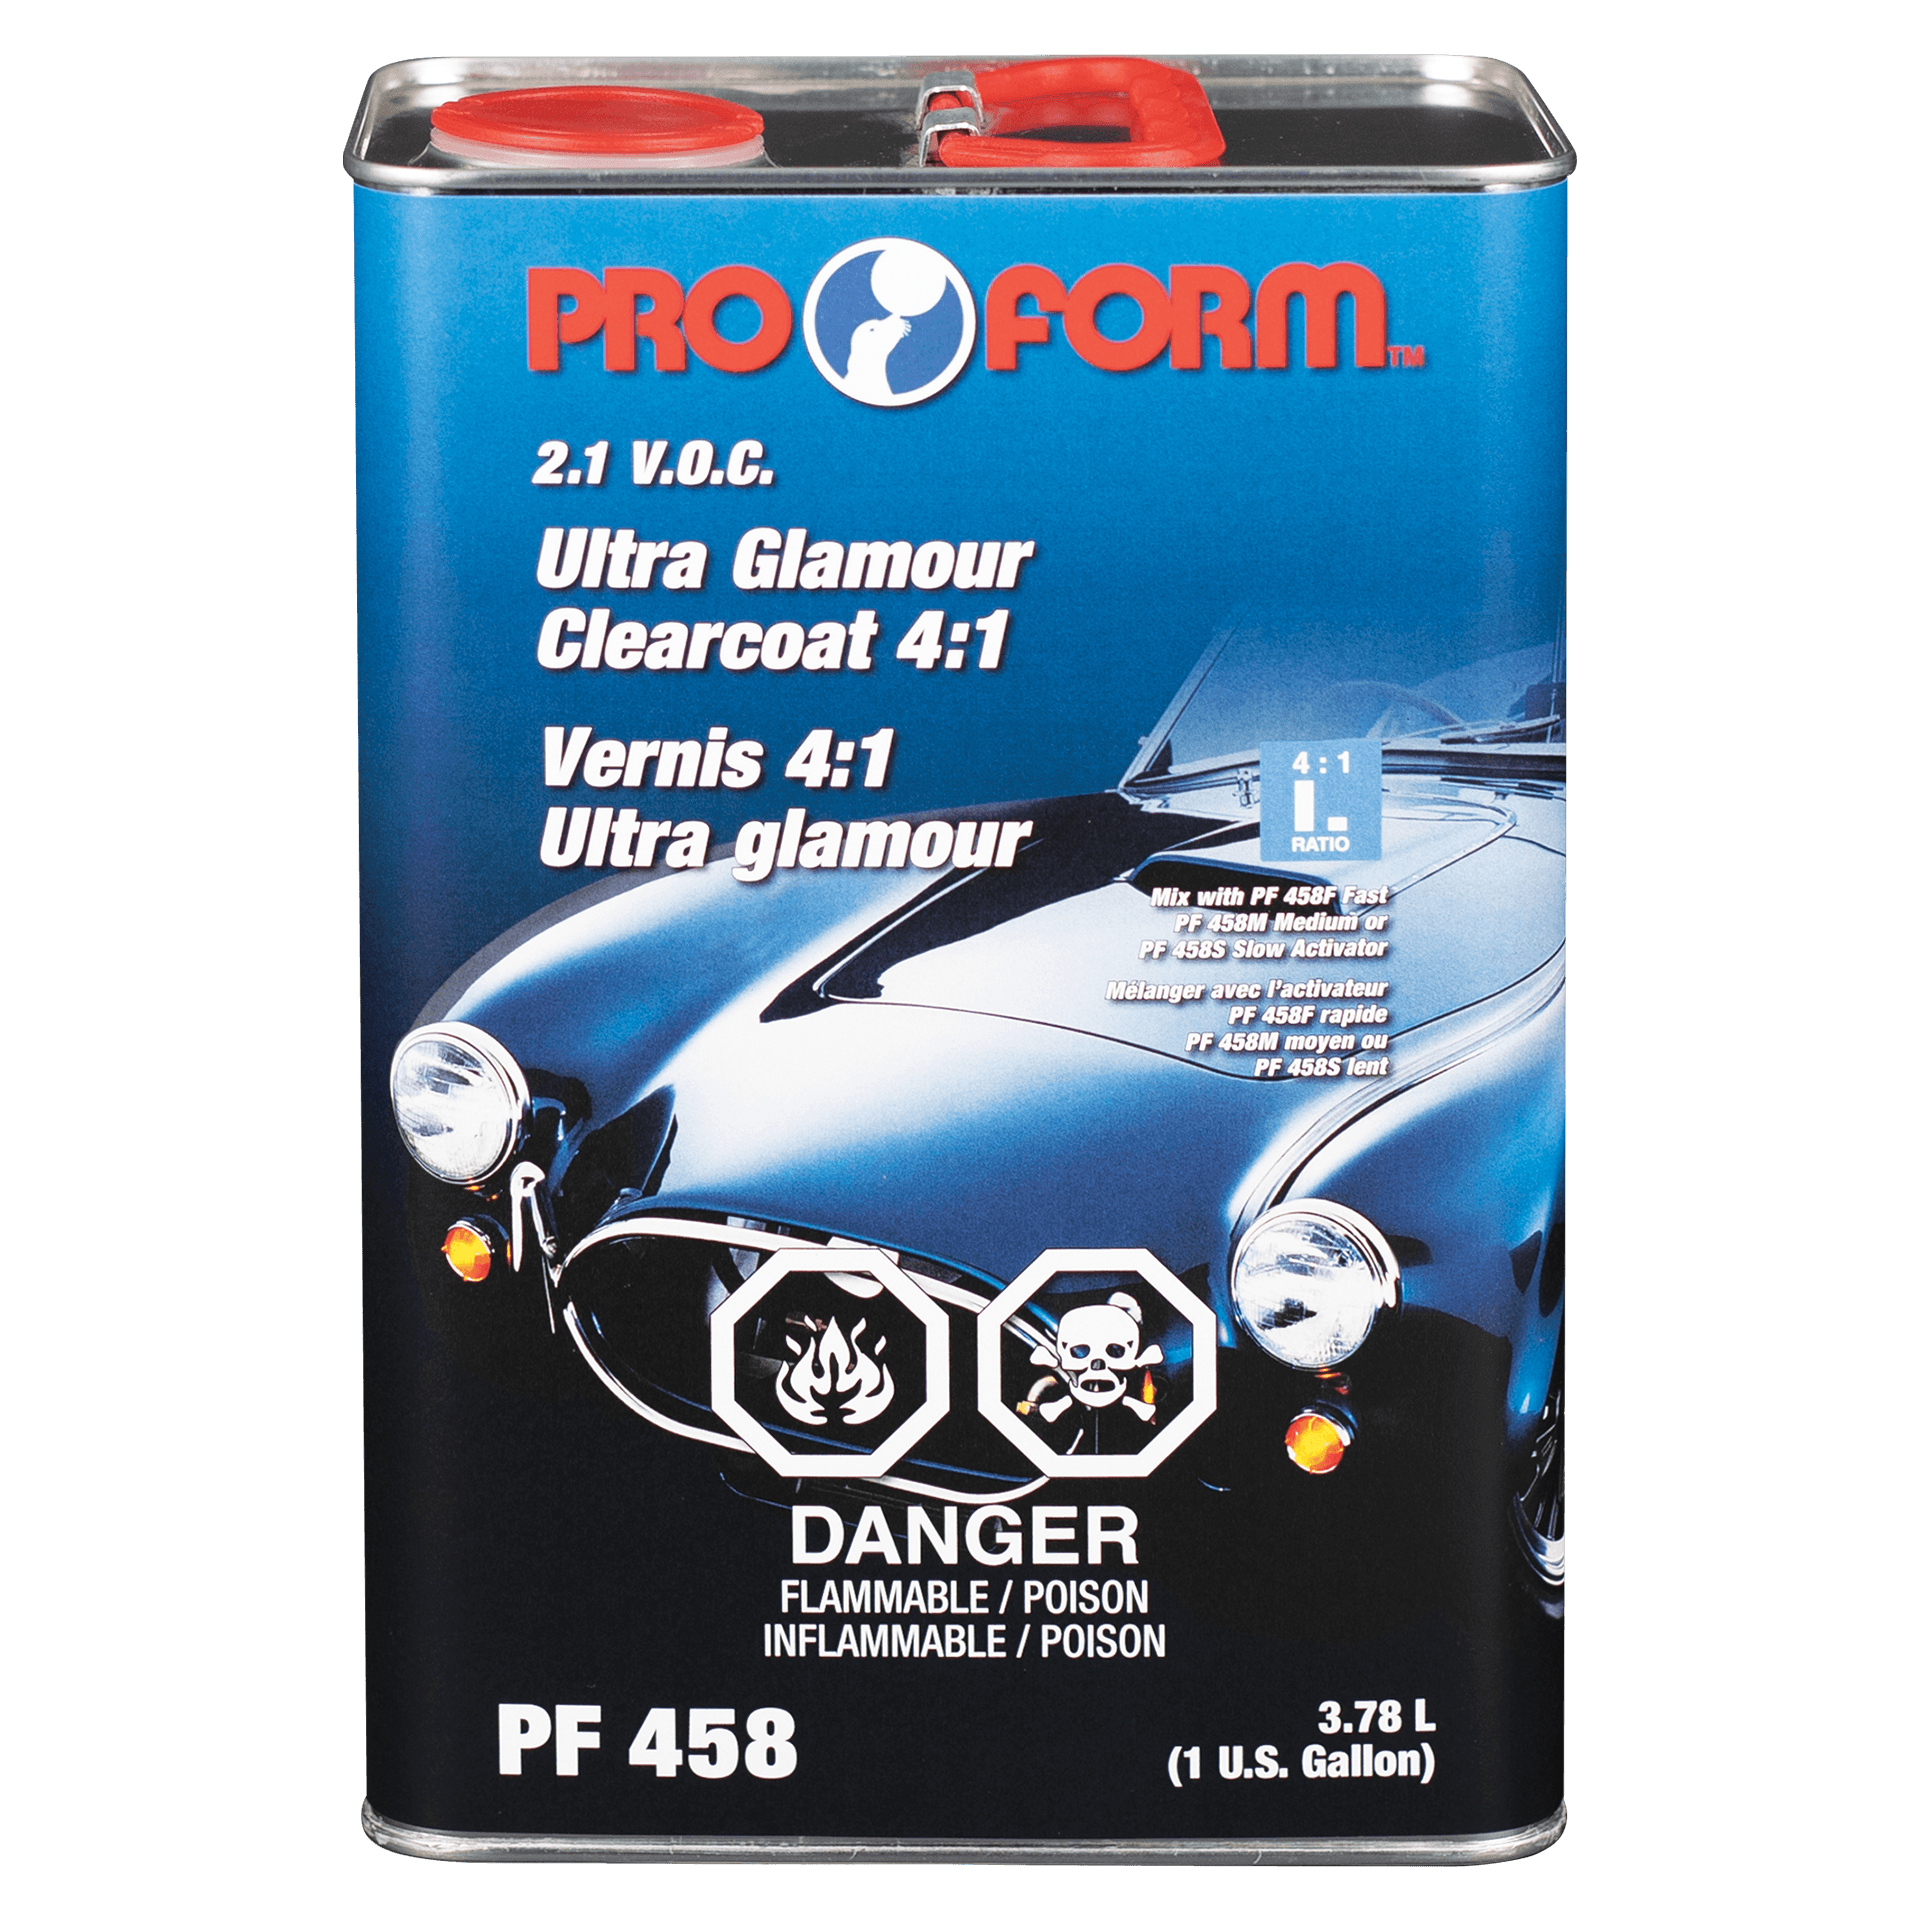 C-9500 Turbo-Fil Fast Dry Urethane Clearcoat 44% Solid - 1 Gallon